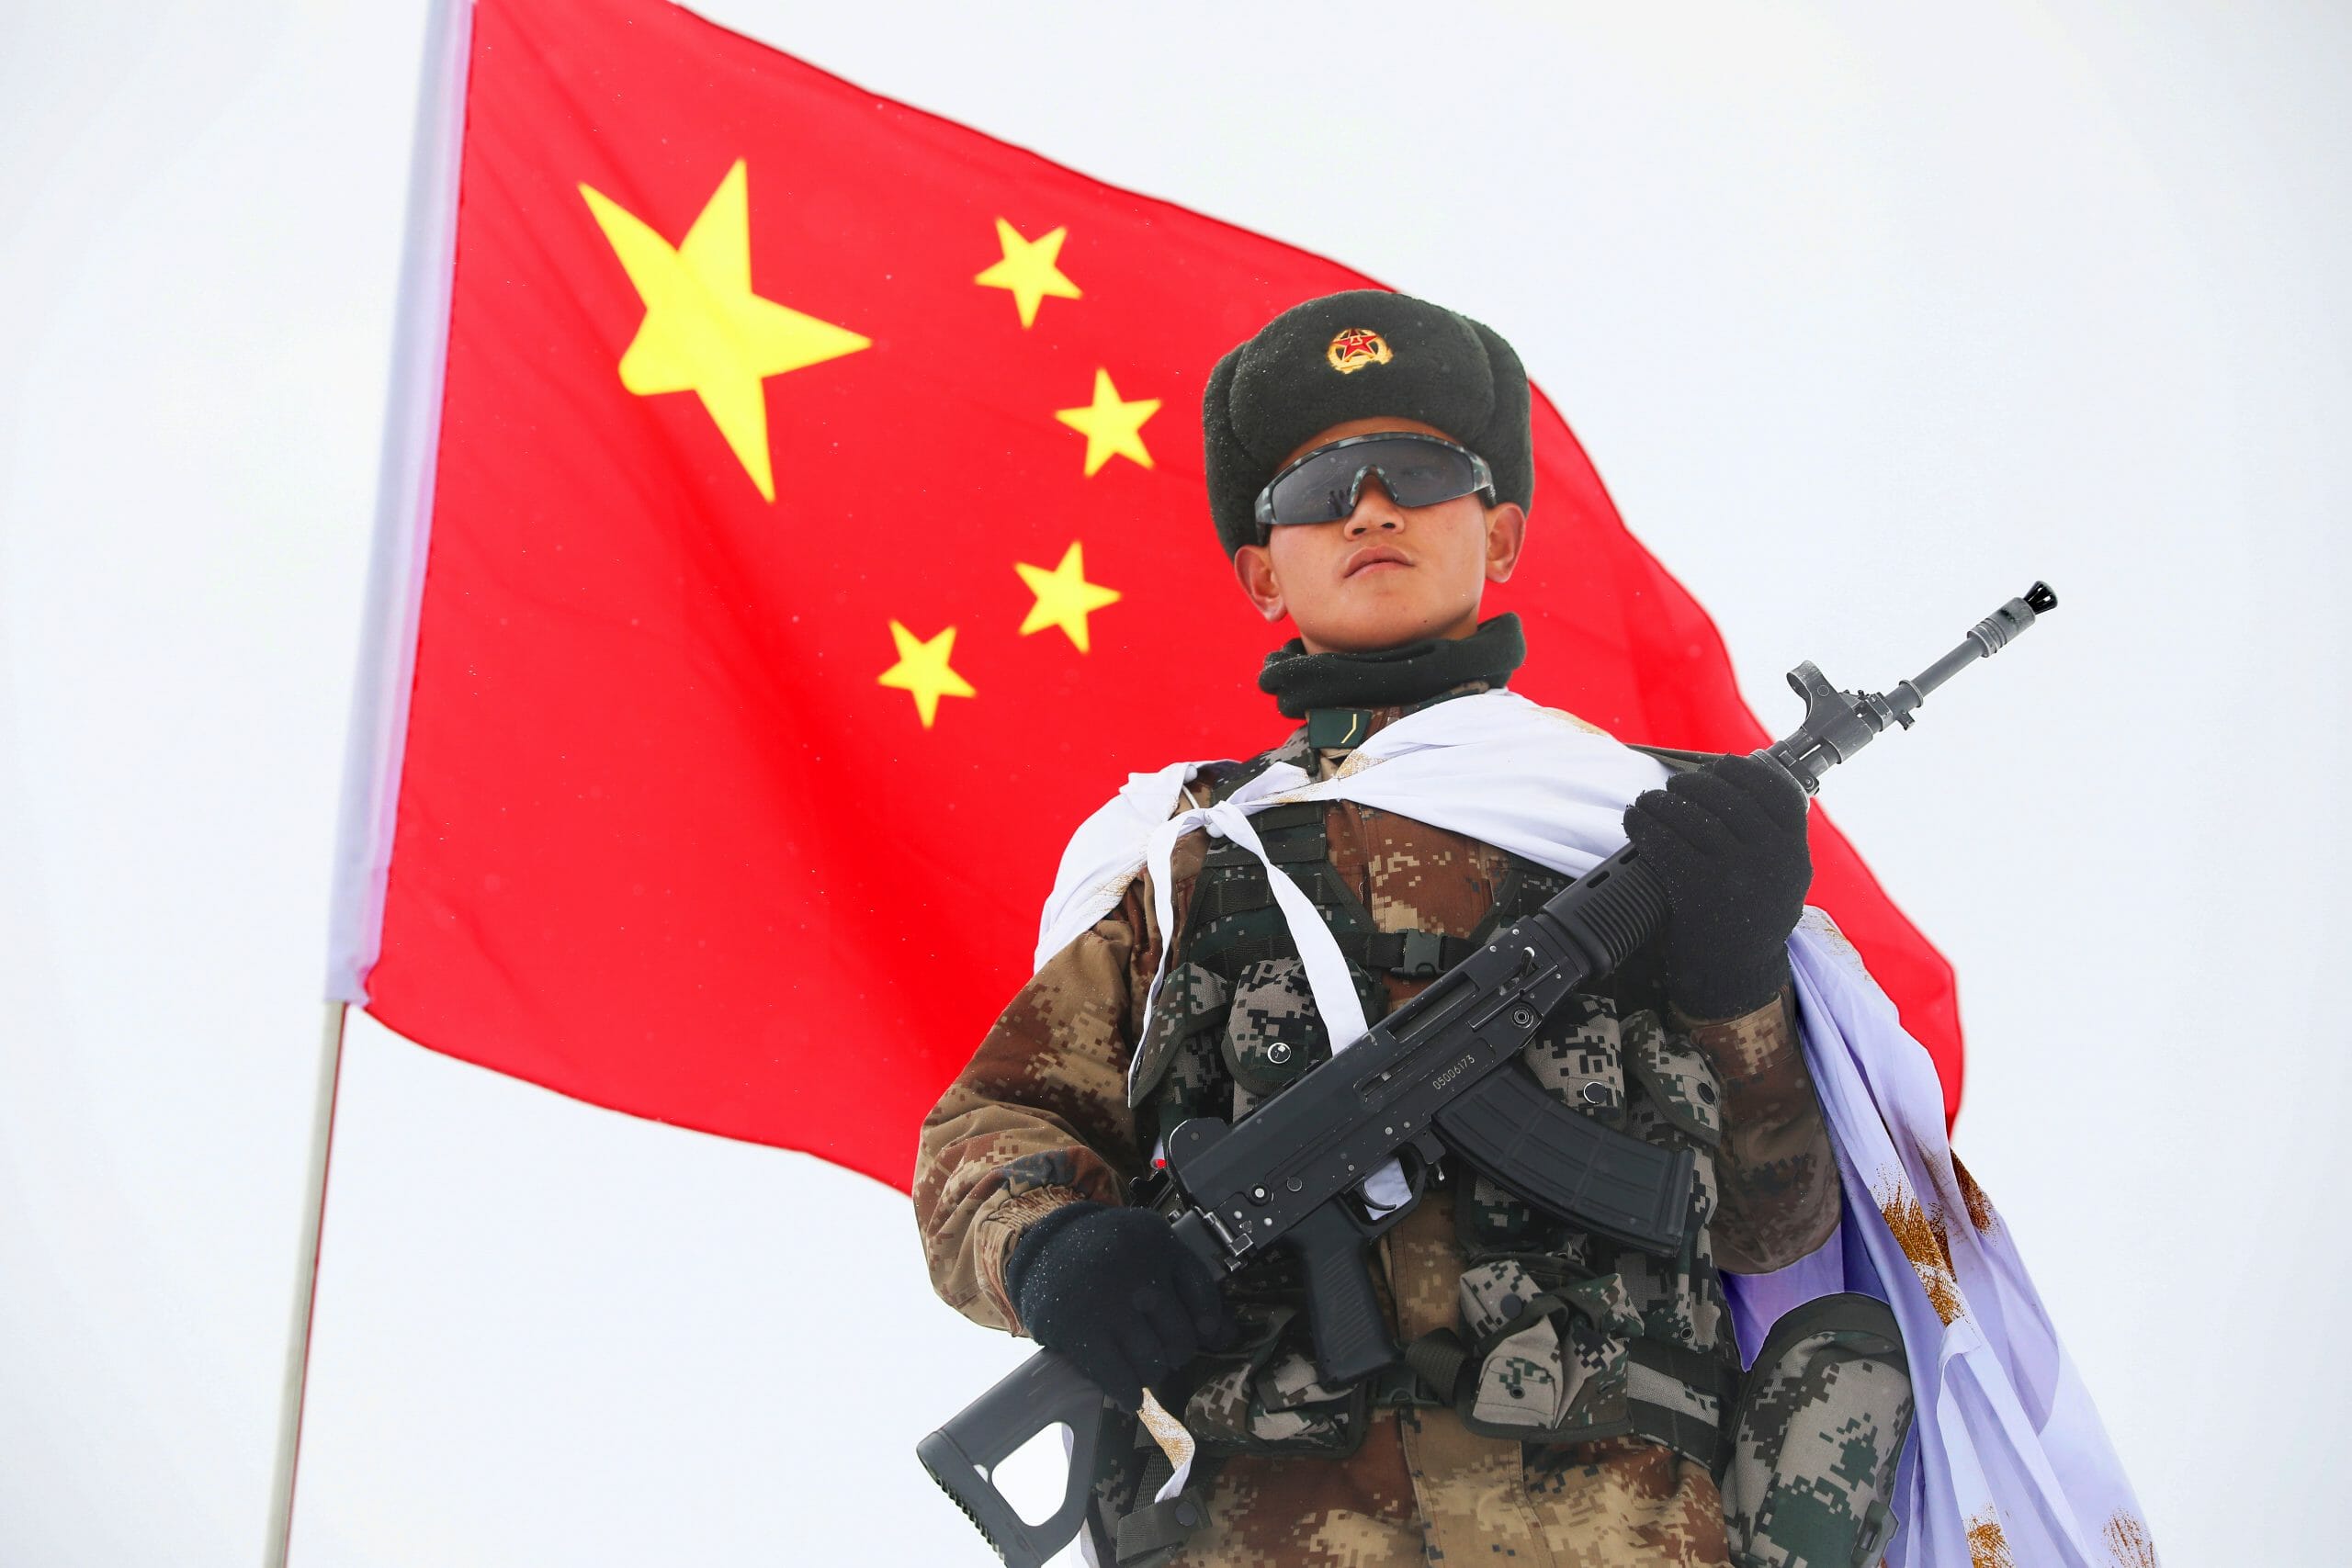 Chinese Report Claims U.S. is Responsible for Humanitarian Disasters › American Greatness